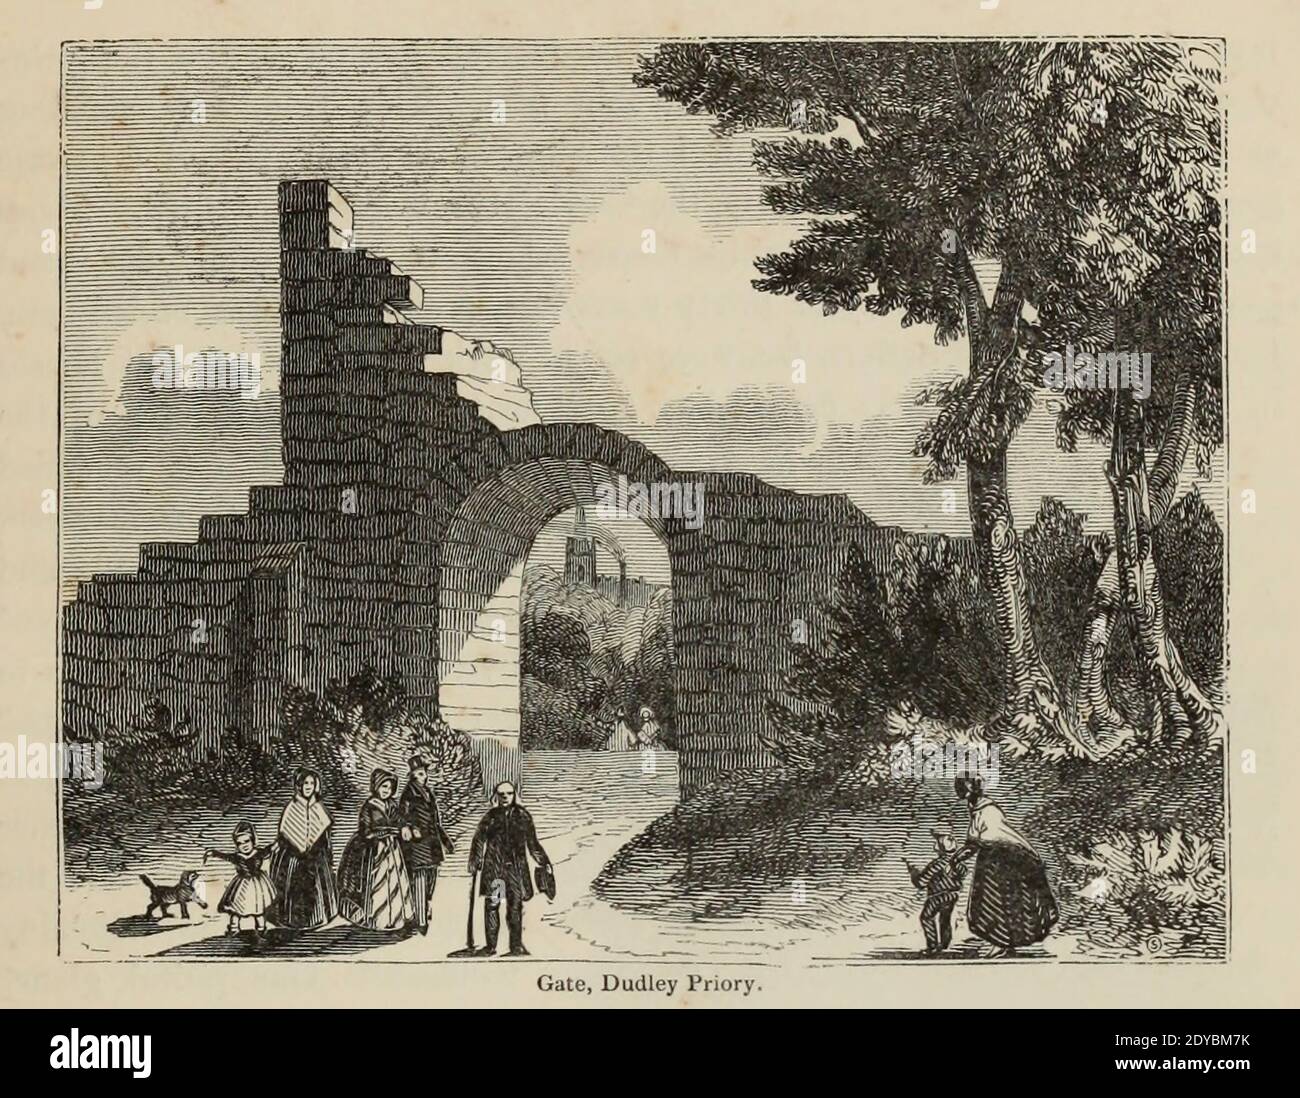 Gate at Dudley [West Midlands, England] Priory From the book The wanderings of a pen and pencil by Palmer, F. P. (Francis Paul); Illustrated by Crowquill, Alfred, [Alfred Henry Forrester]  Published in London by Jeremiah How in 1846 Stock Photo